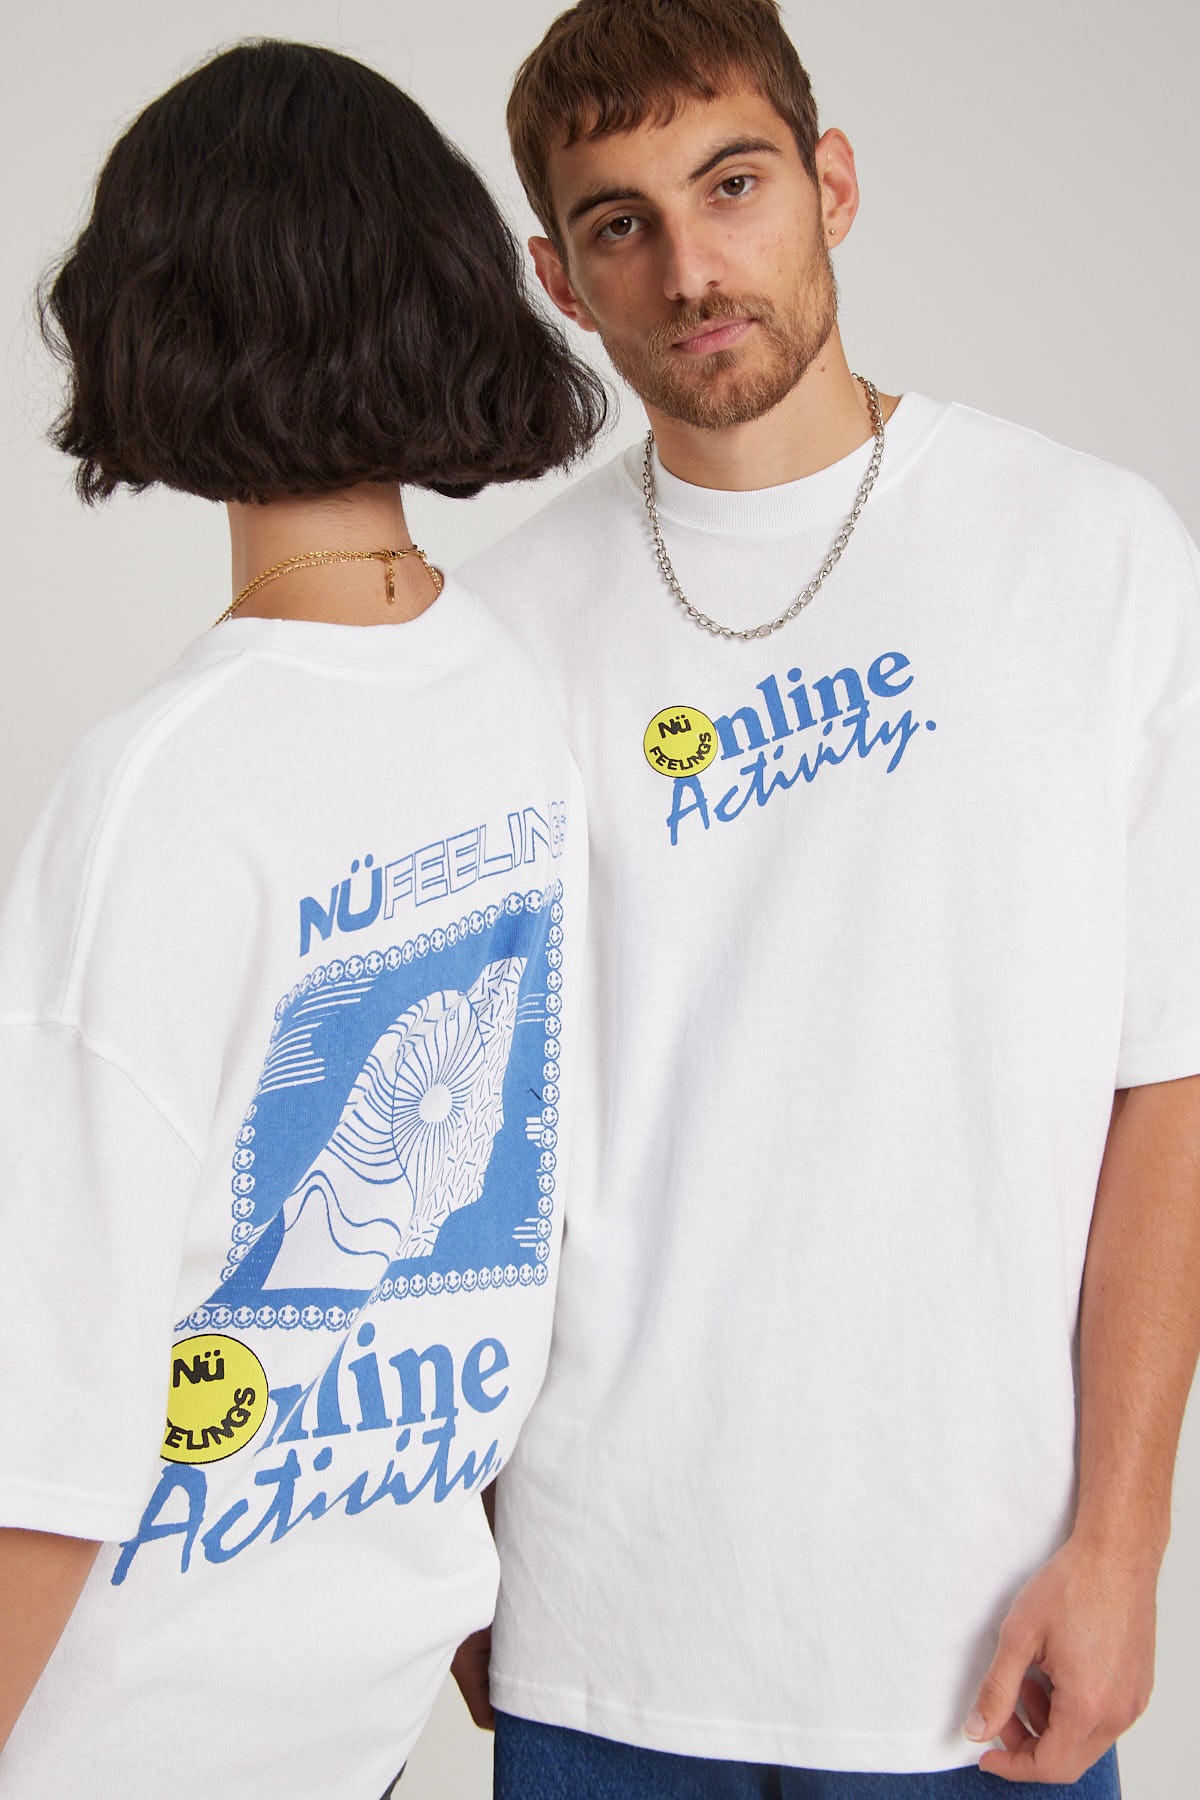 Nu Feelings Activated Online Oversize Heavyweight Tee White